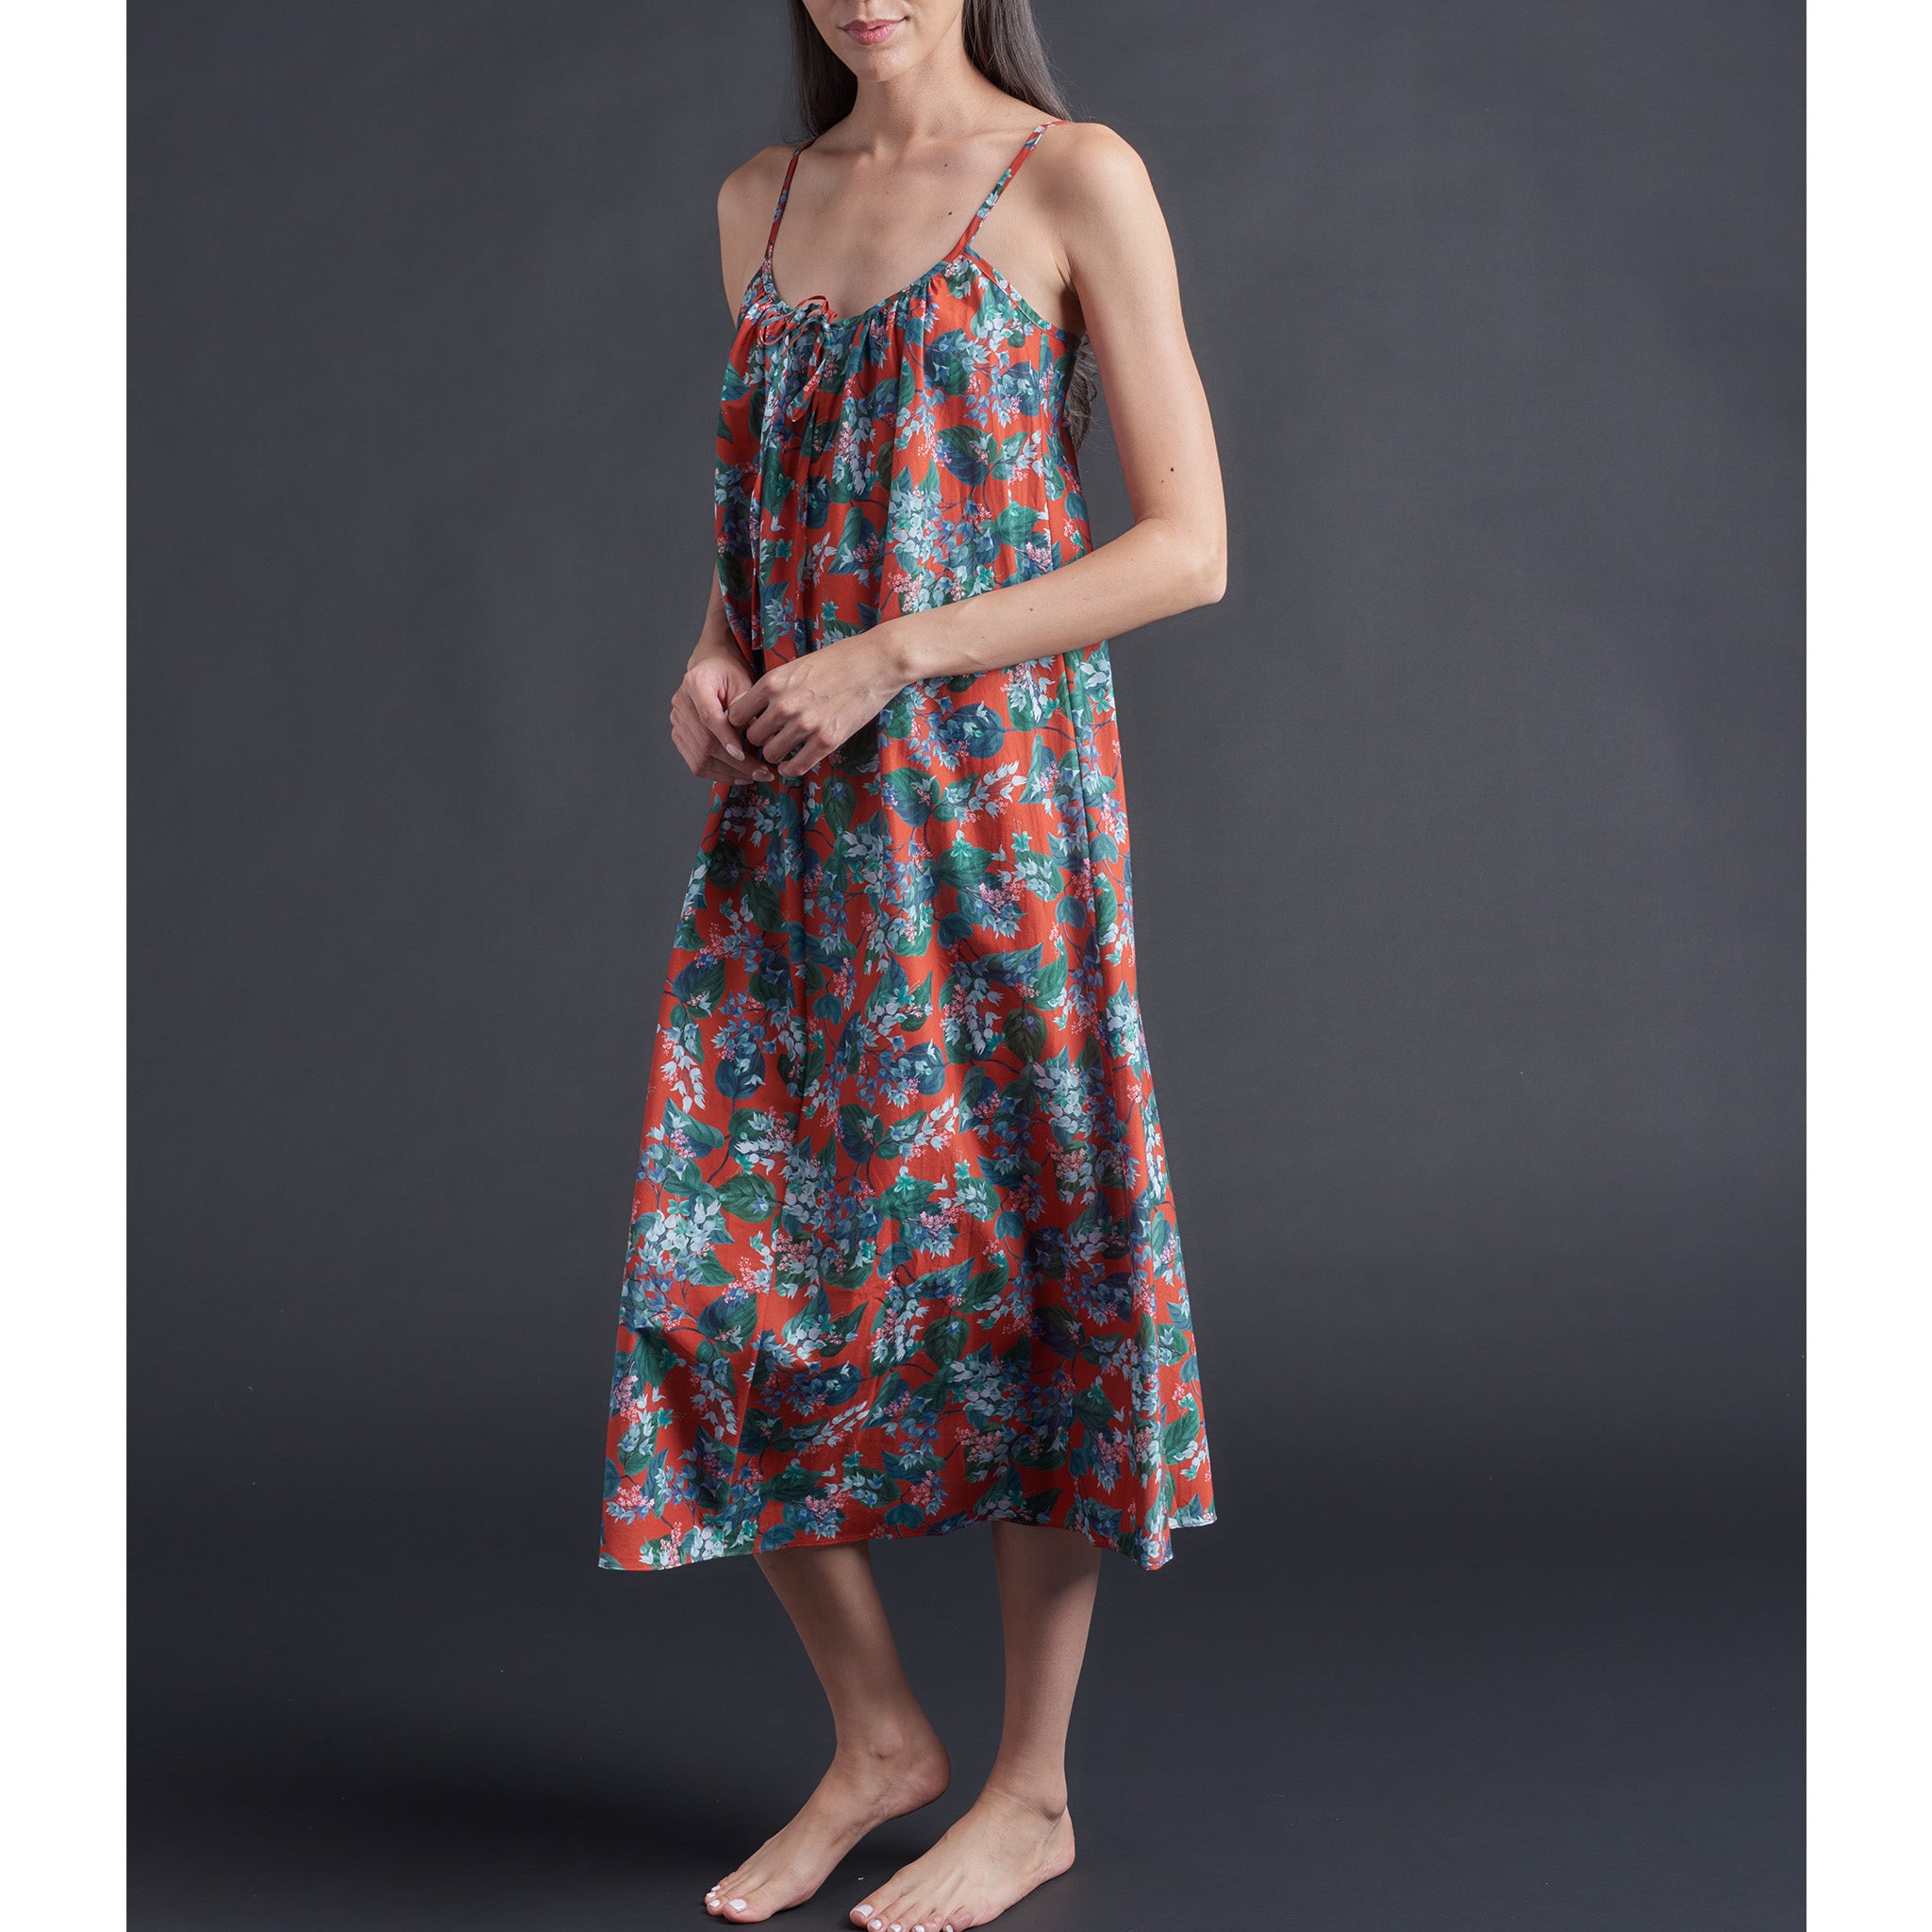 Thea Slip dress in Osterly Red Liberty Print Cotton